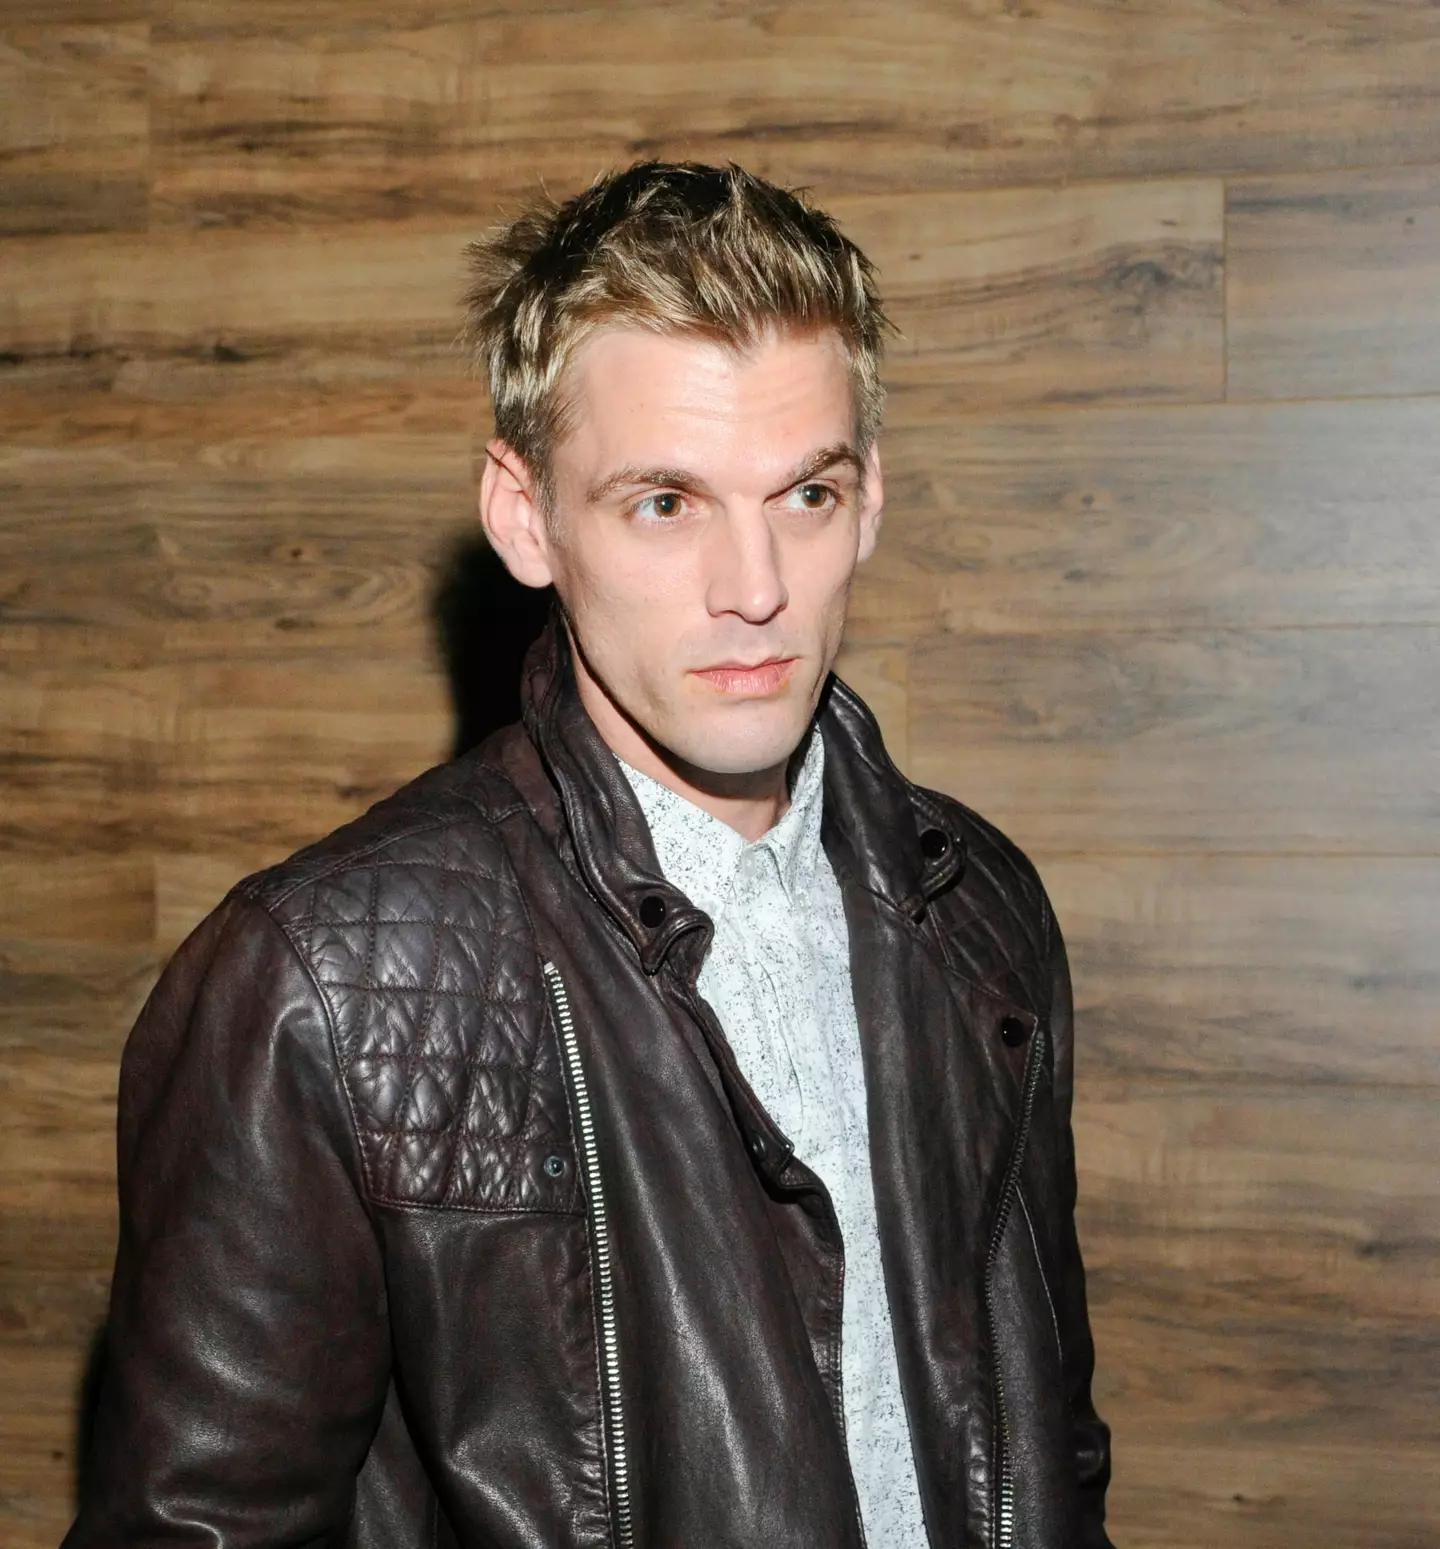 Aaron Carter has revealed he’s attending a rehab program in the hopes of regaining custody of his nine-month-old son.